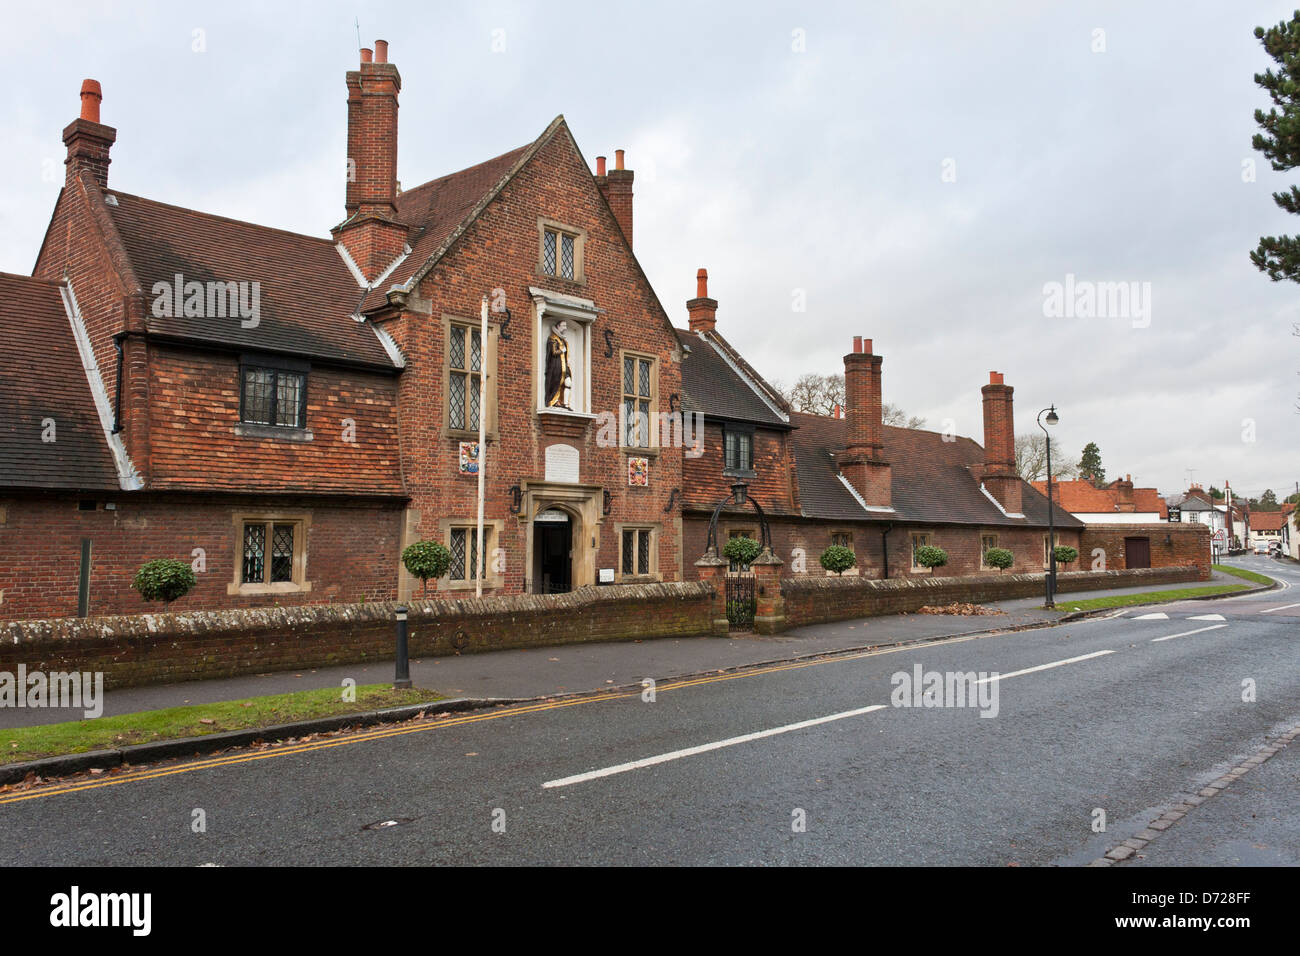 Traditional almshouses in the village of Bray in Berkshire, the buildings are Grade 1 listed. Stock Photo